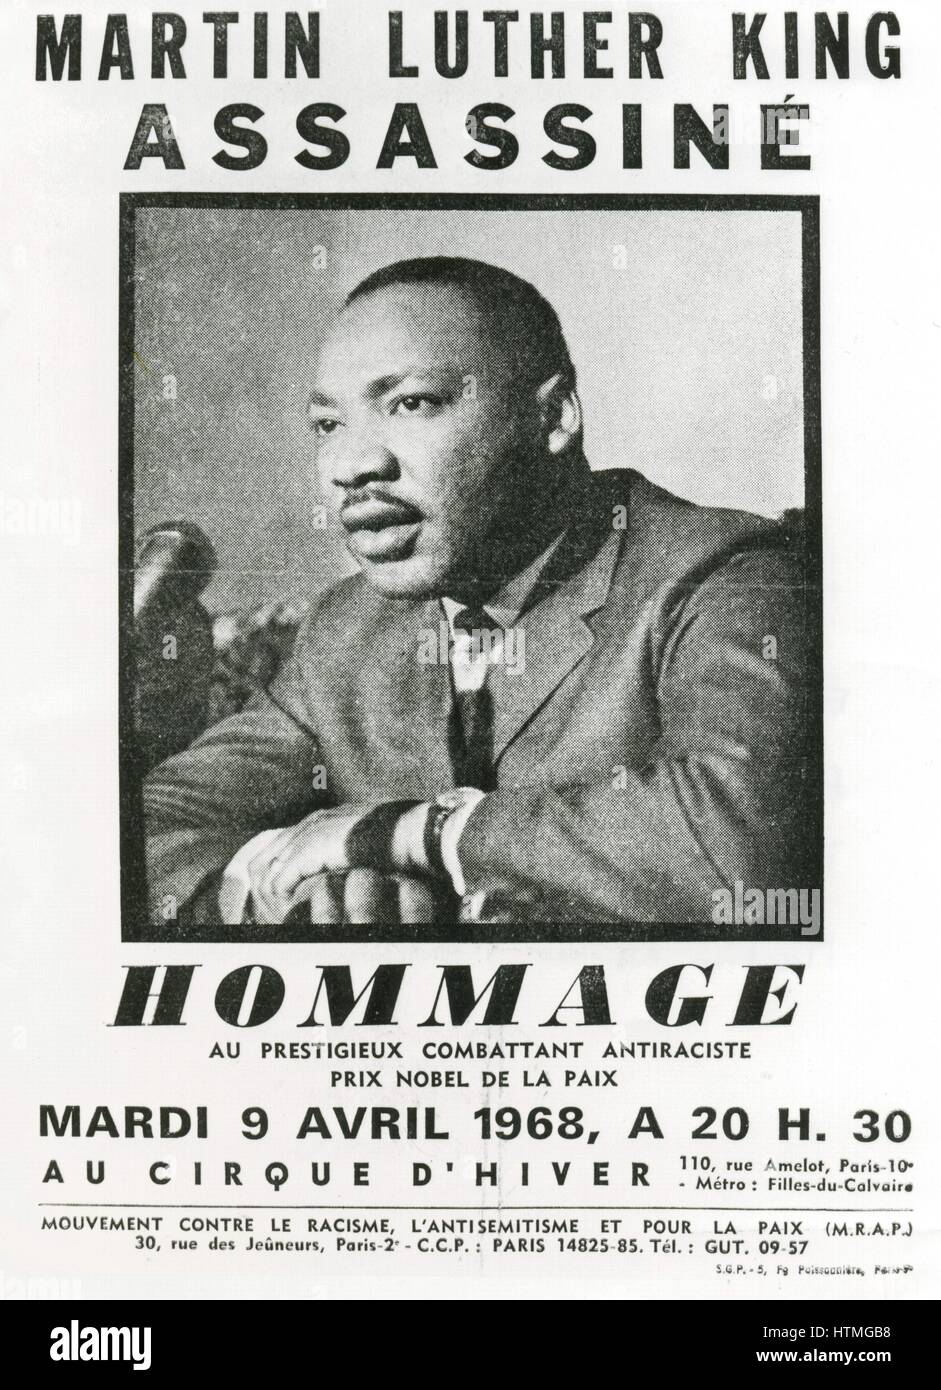 Martin Luther King Jnr. (1929-1968) American Baptist minster and black civil rights leader: Awarded Nobel Peace Prize, 1964. Poster by the Movement Against Racism and for Peace (MRAP) announcing a meeting in Paris in homage of his life a few days after his assassination on 4 April 1968. Stock Photo